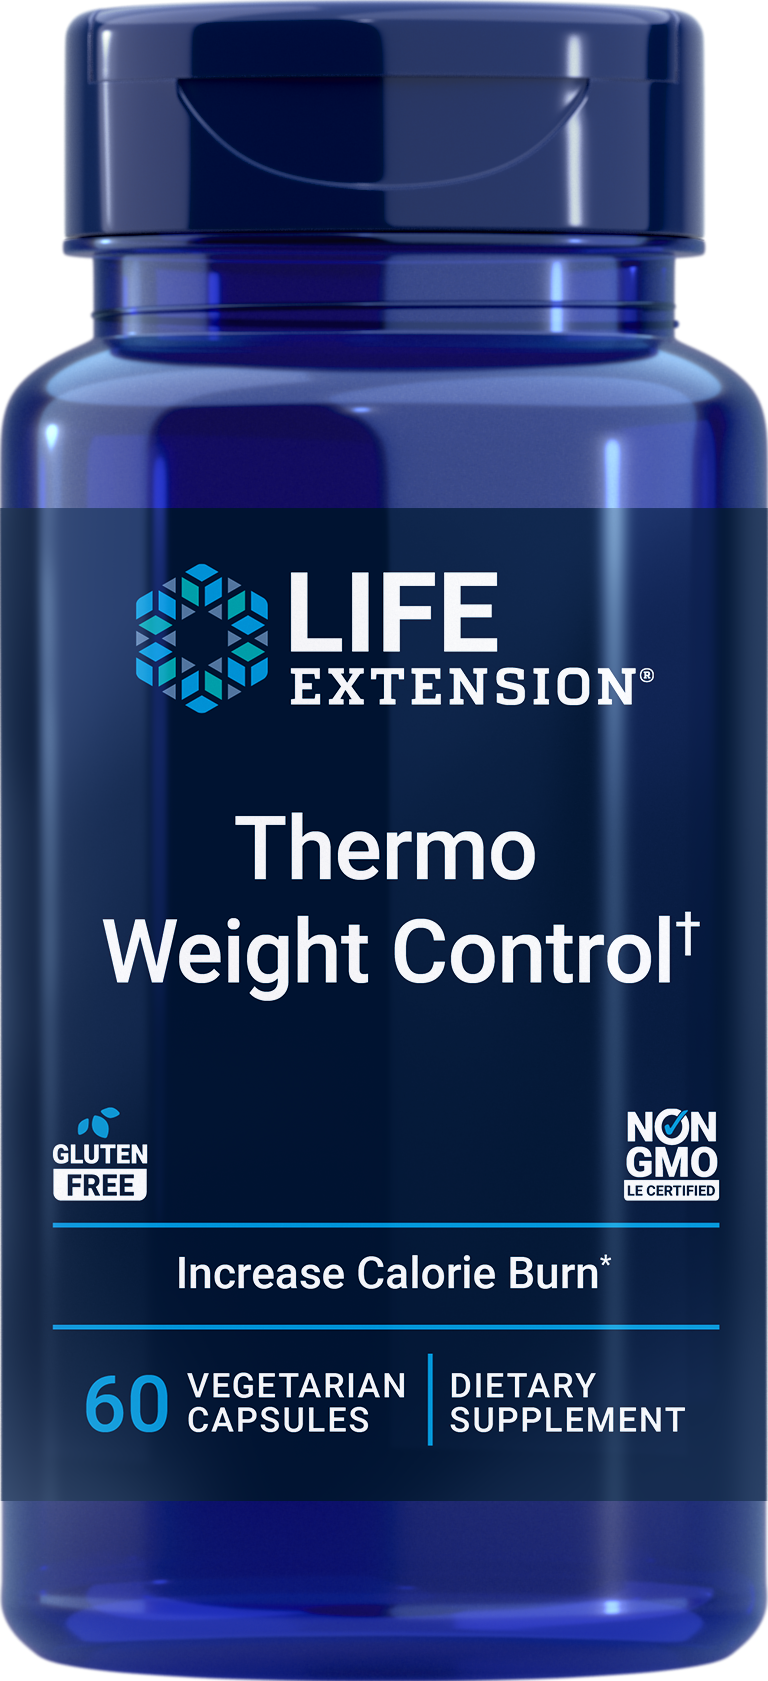 Life Extension new supplement Thermo Weight Control to promote calorie burning nonGMO gluten free vegetarian